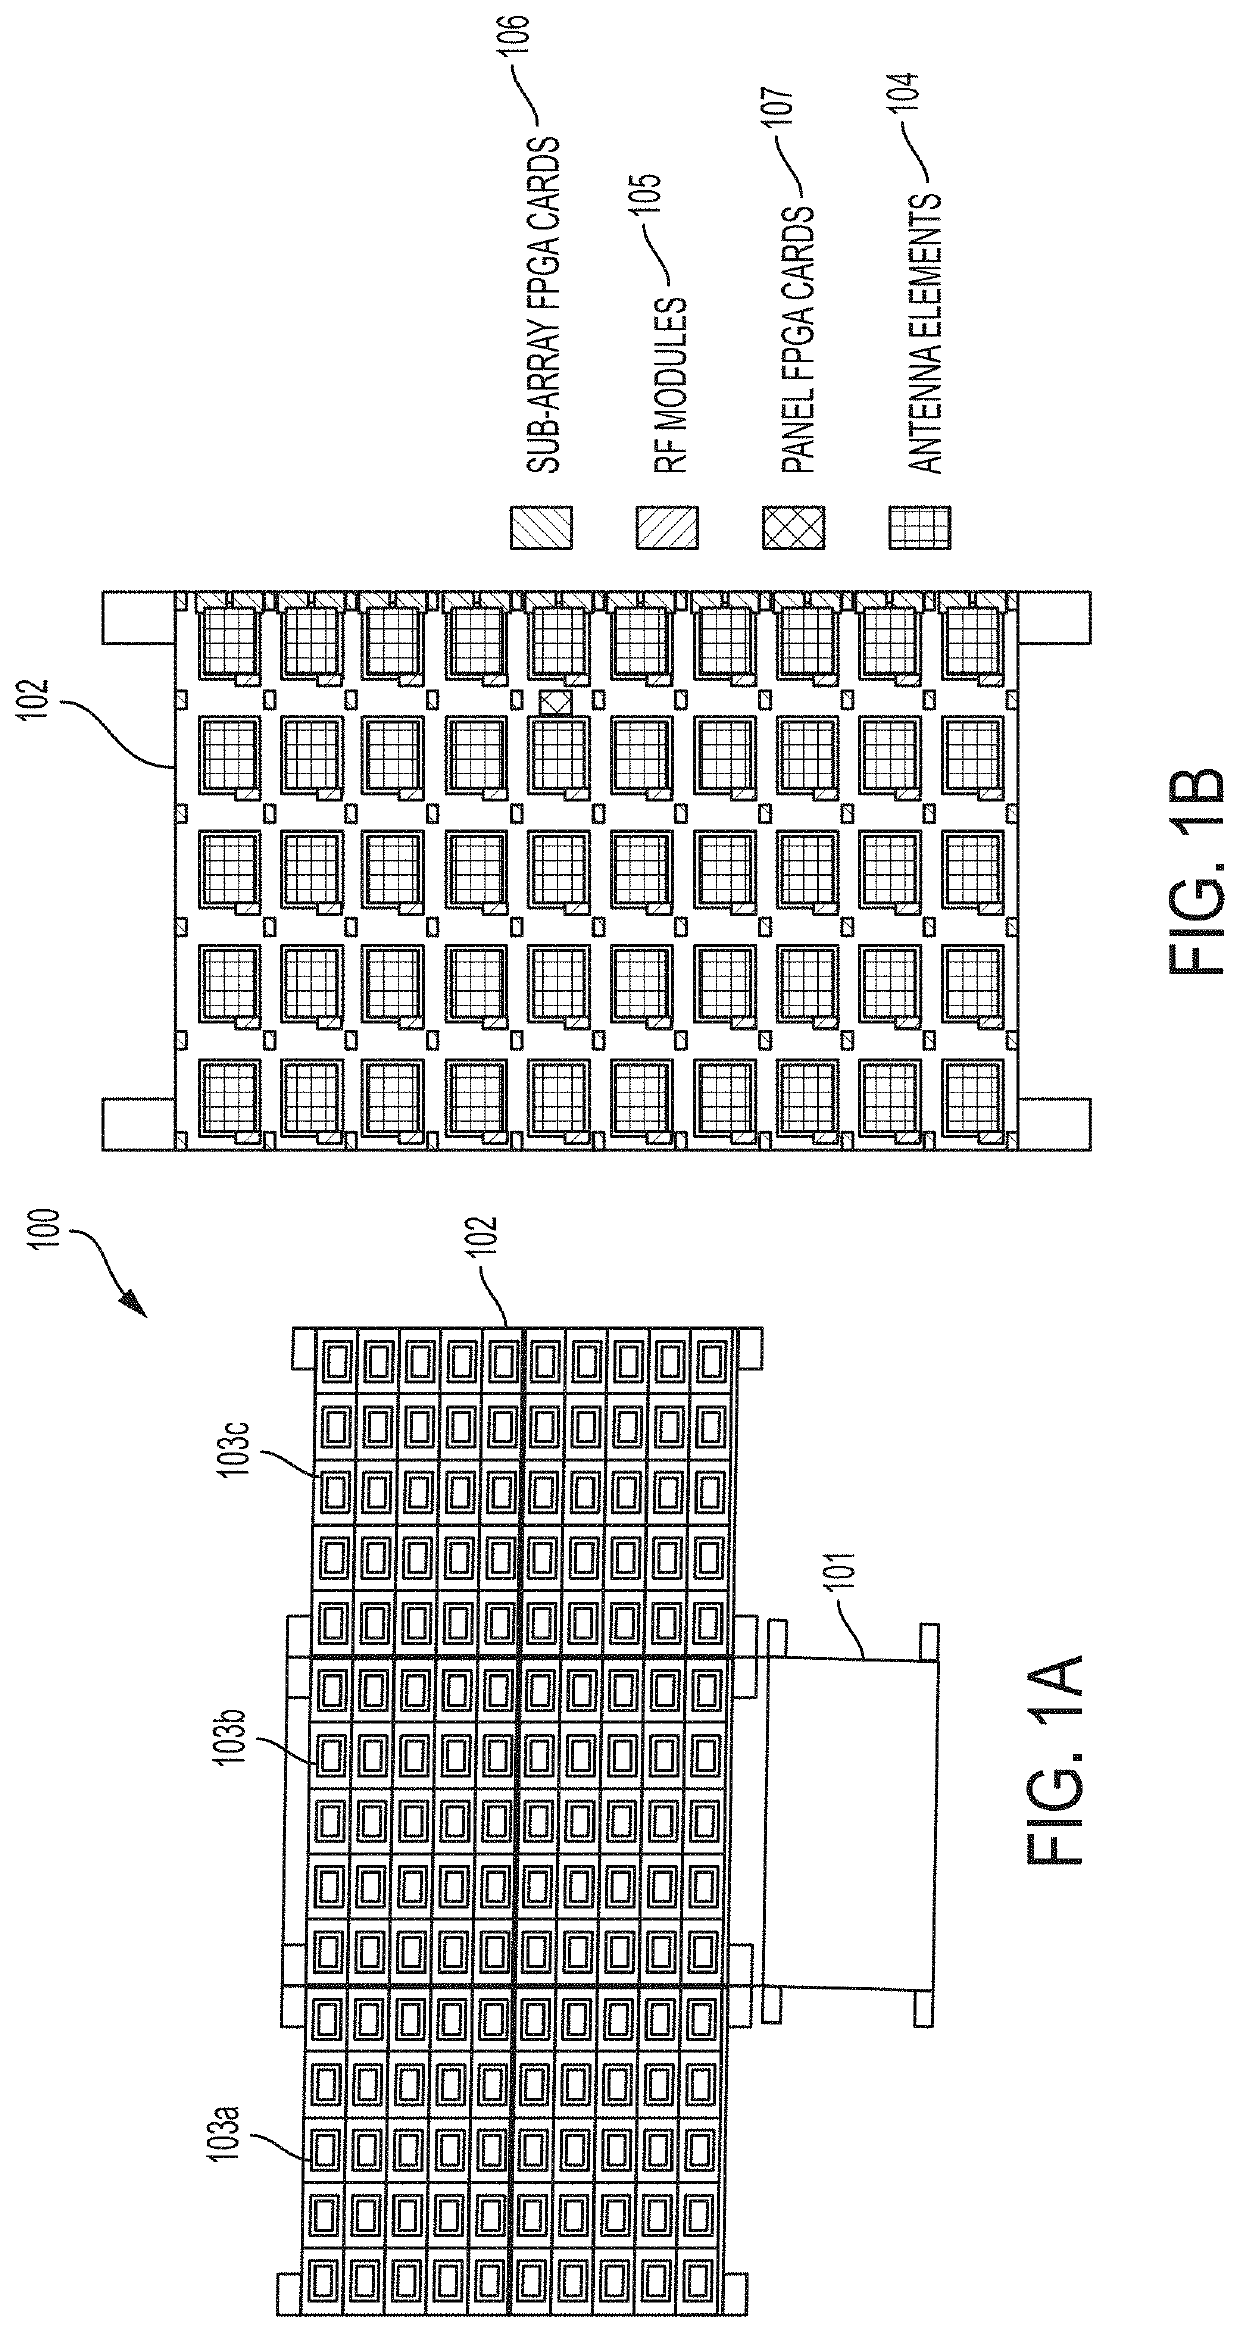 Spaceborne synthetic aperture radar system and method